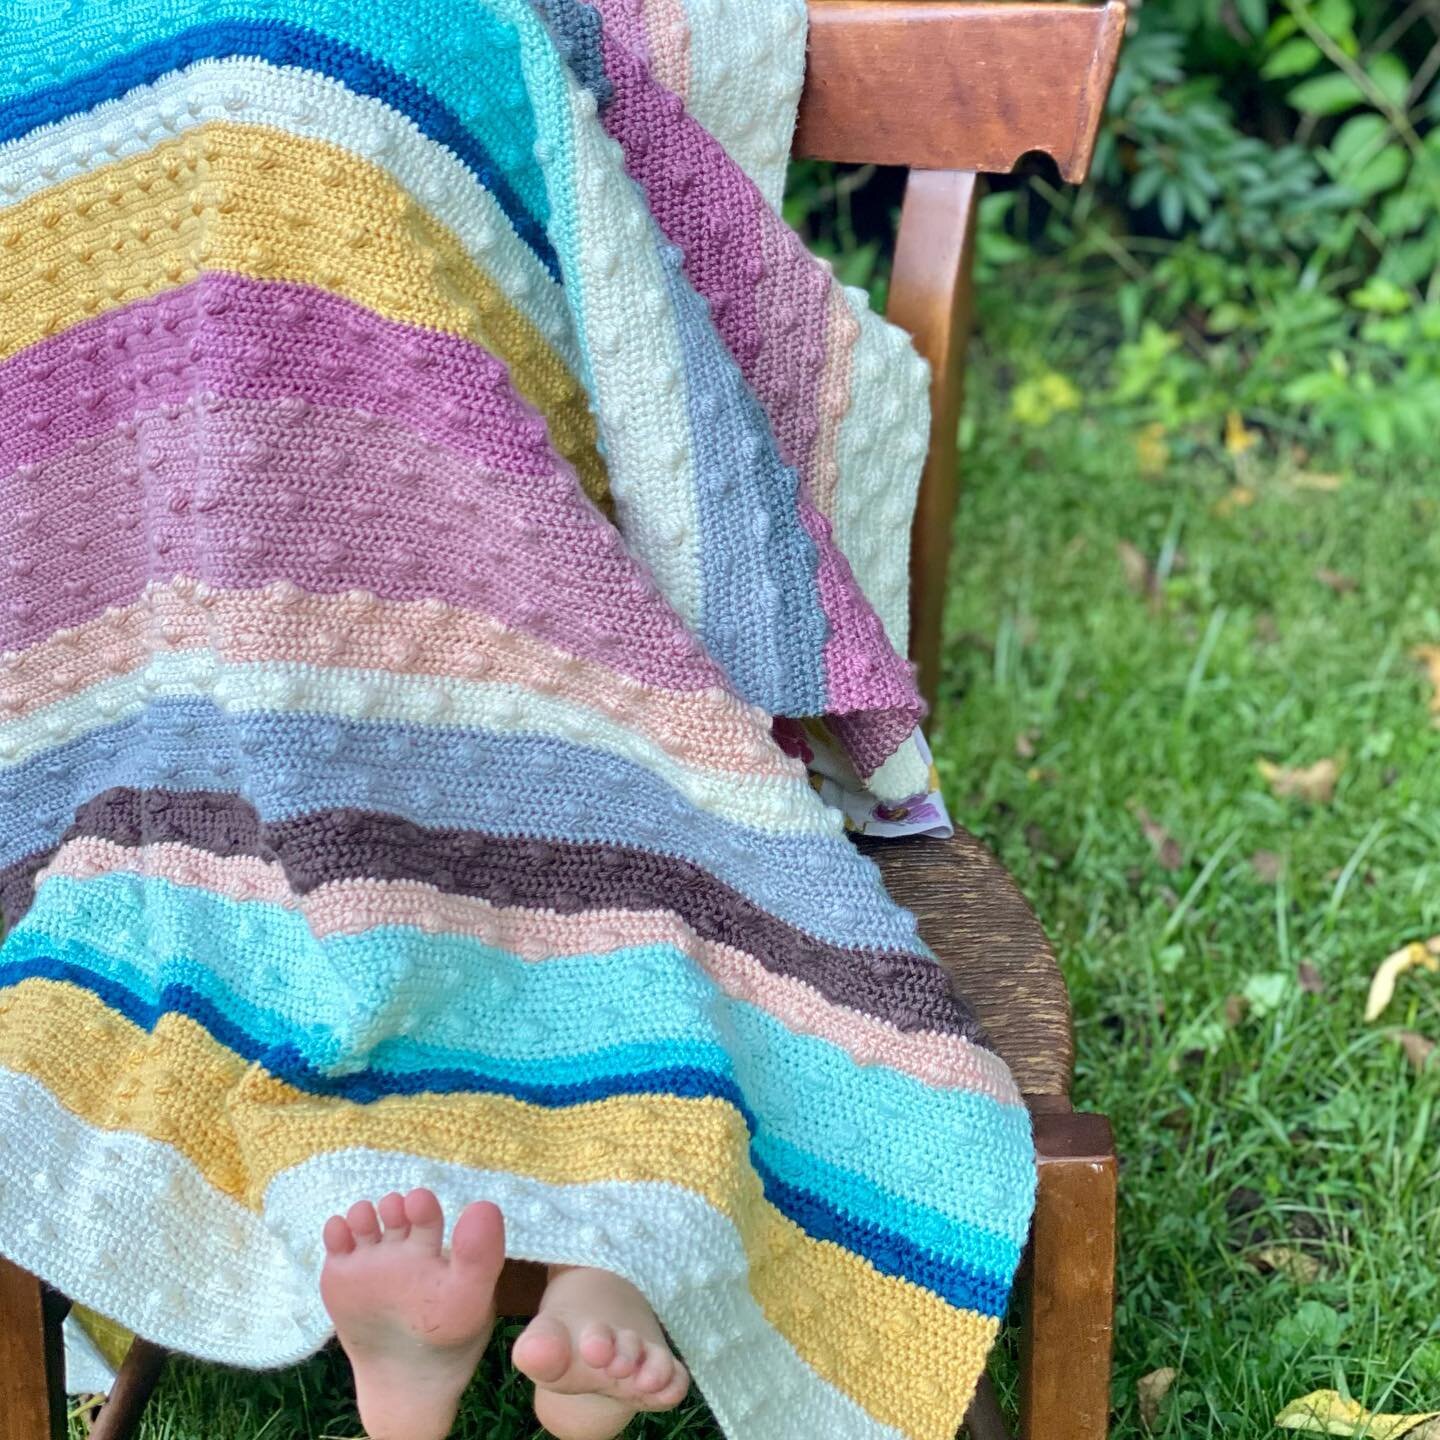 Little toes under the @wild.little.acorn #jaylablanket that I crocheted. My daughter loved snuggling this blanket even while I was still working on it. #yarnspirations #caronsimplysoftyarn